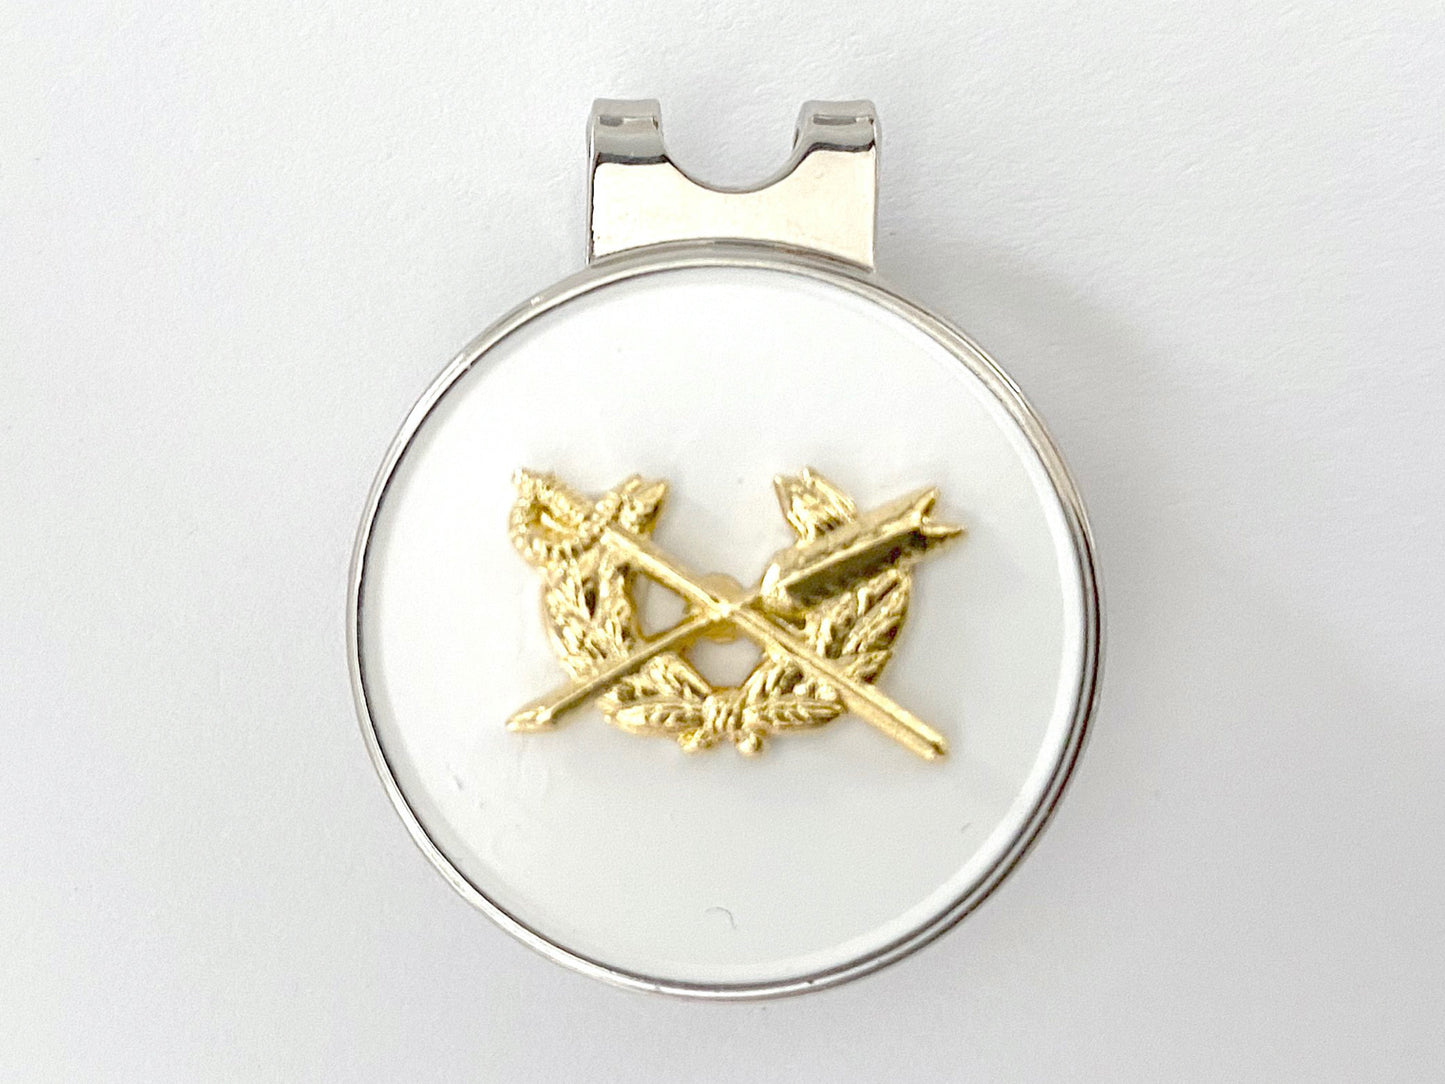 Judge Advocate General's Corps (JAG) Golf Hat Clip and Ball Marker